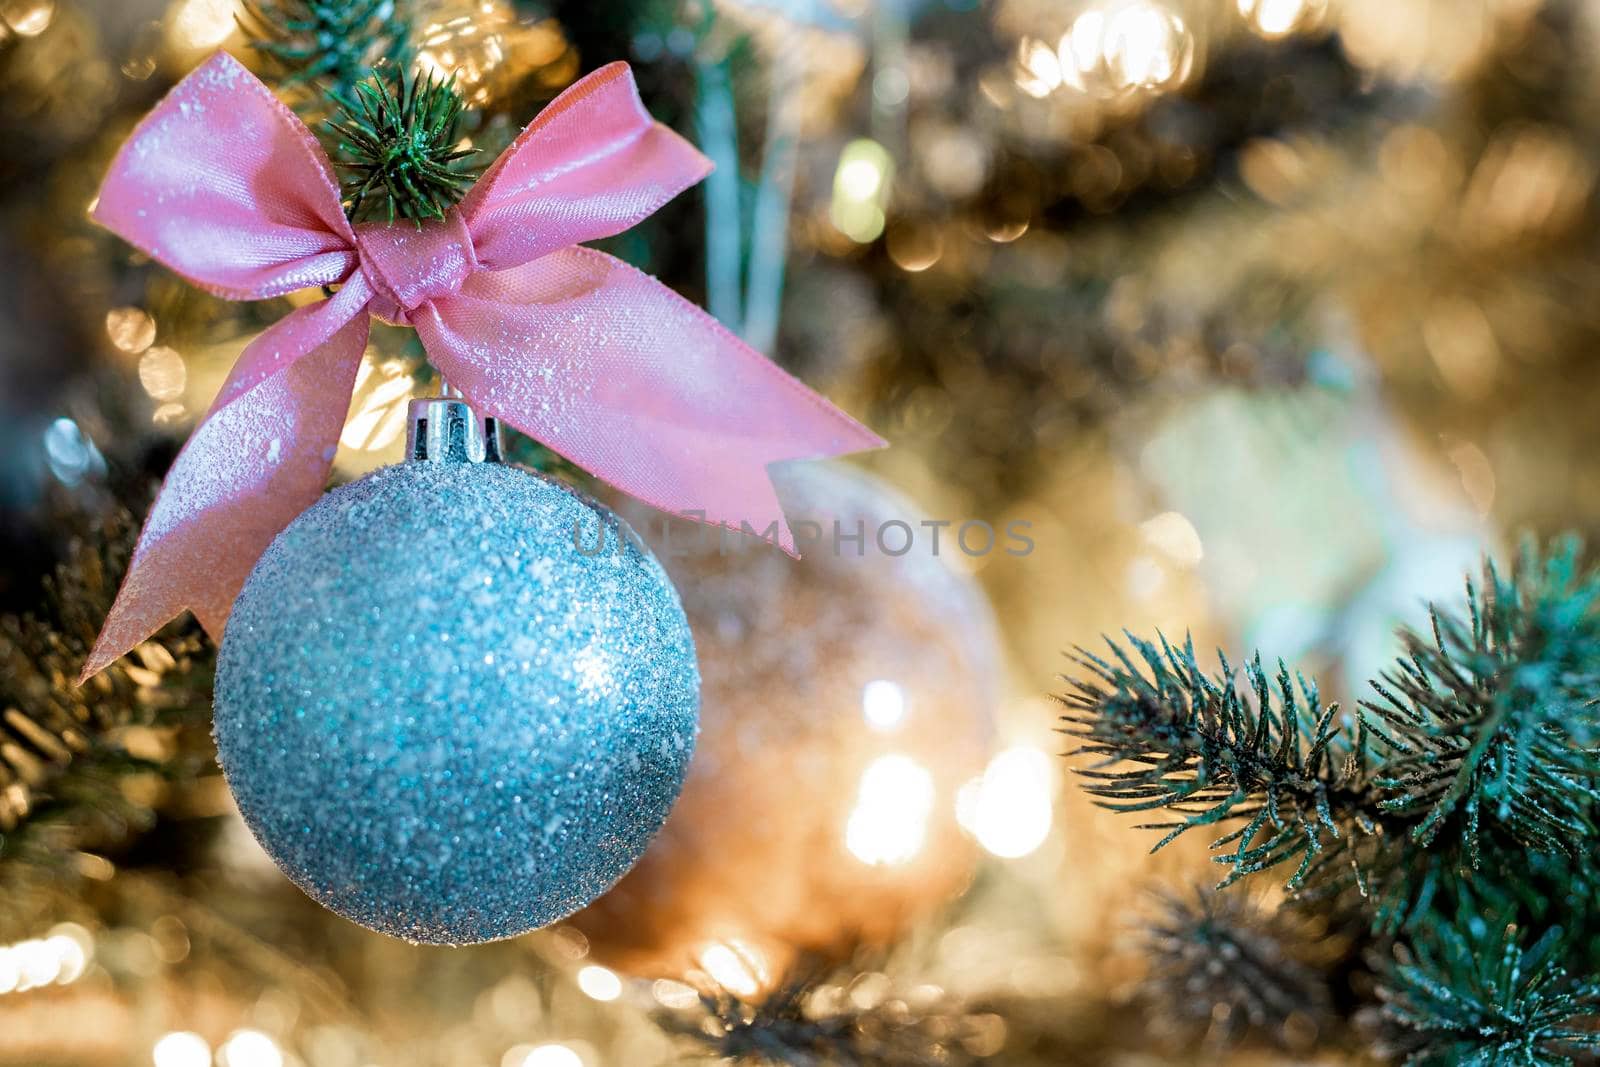 Sparkling Christmas bauble with pink bow hanging in decorated tree, copy space and bokeh light background, Holiday concept by Annebel146